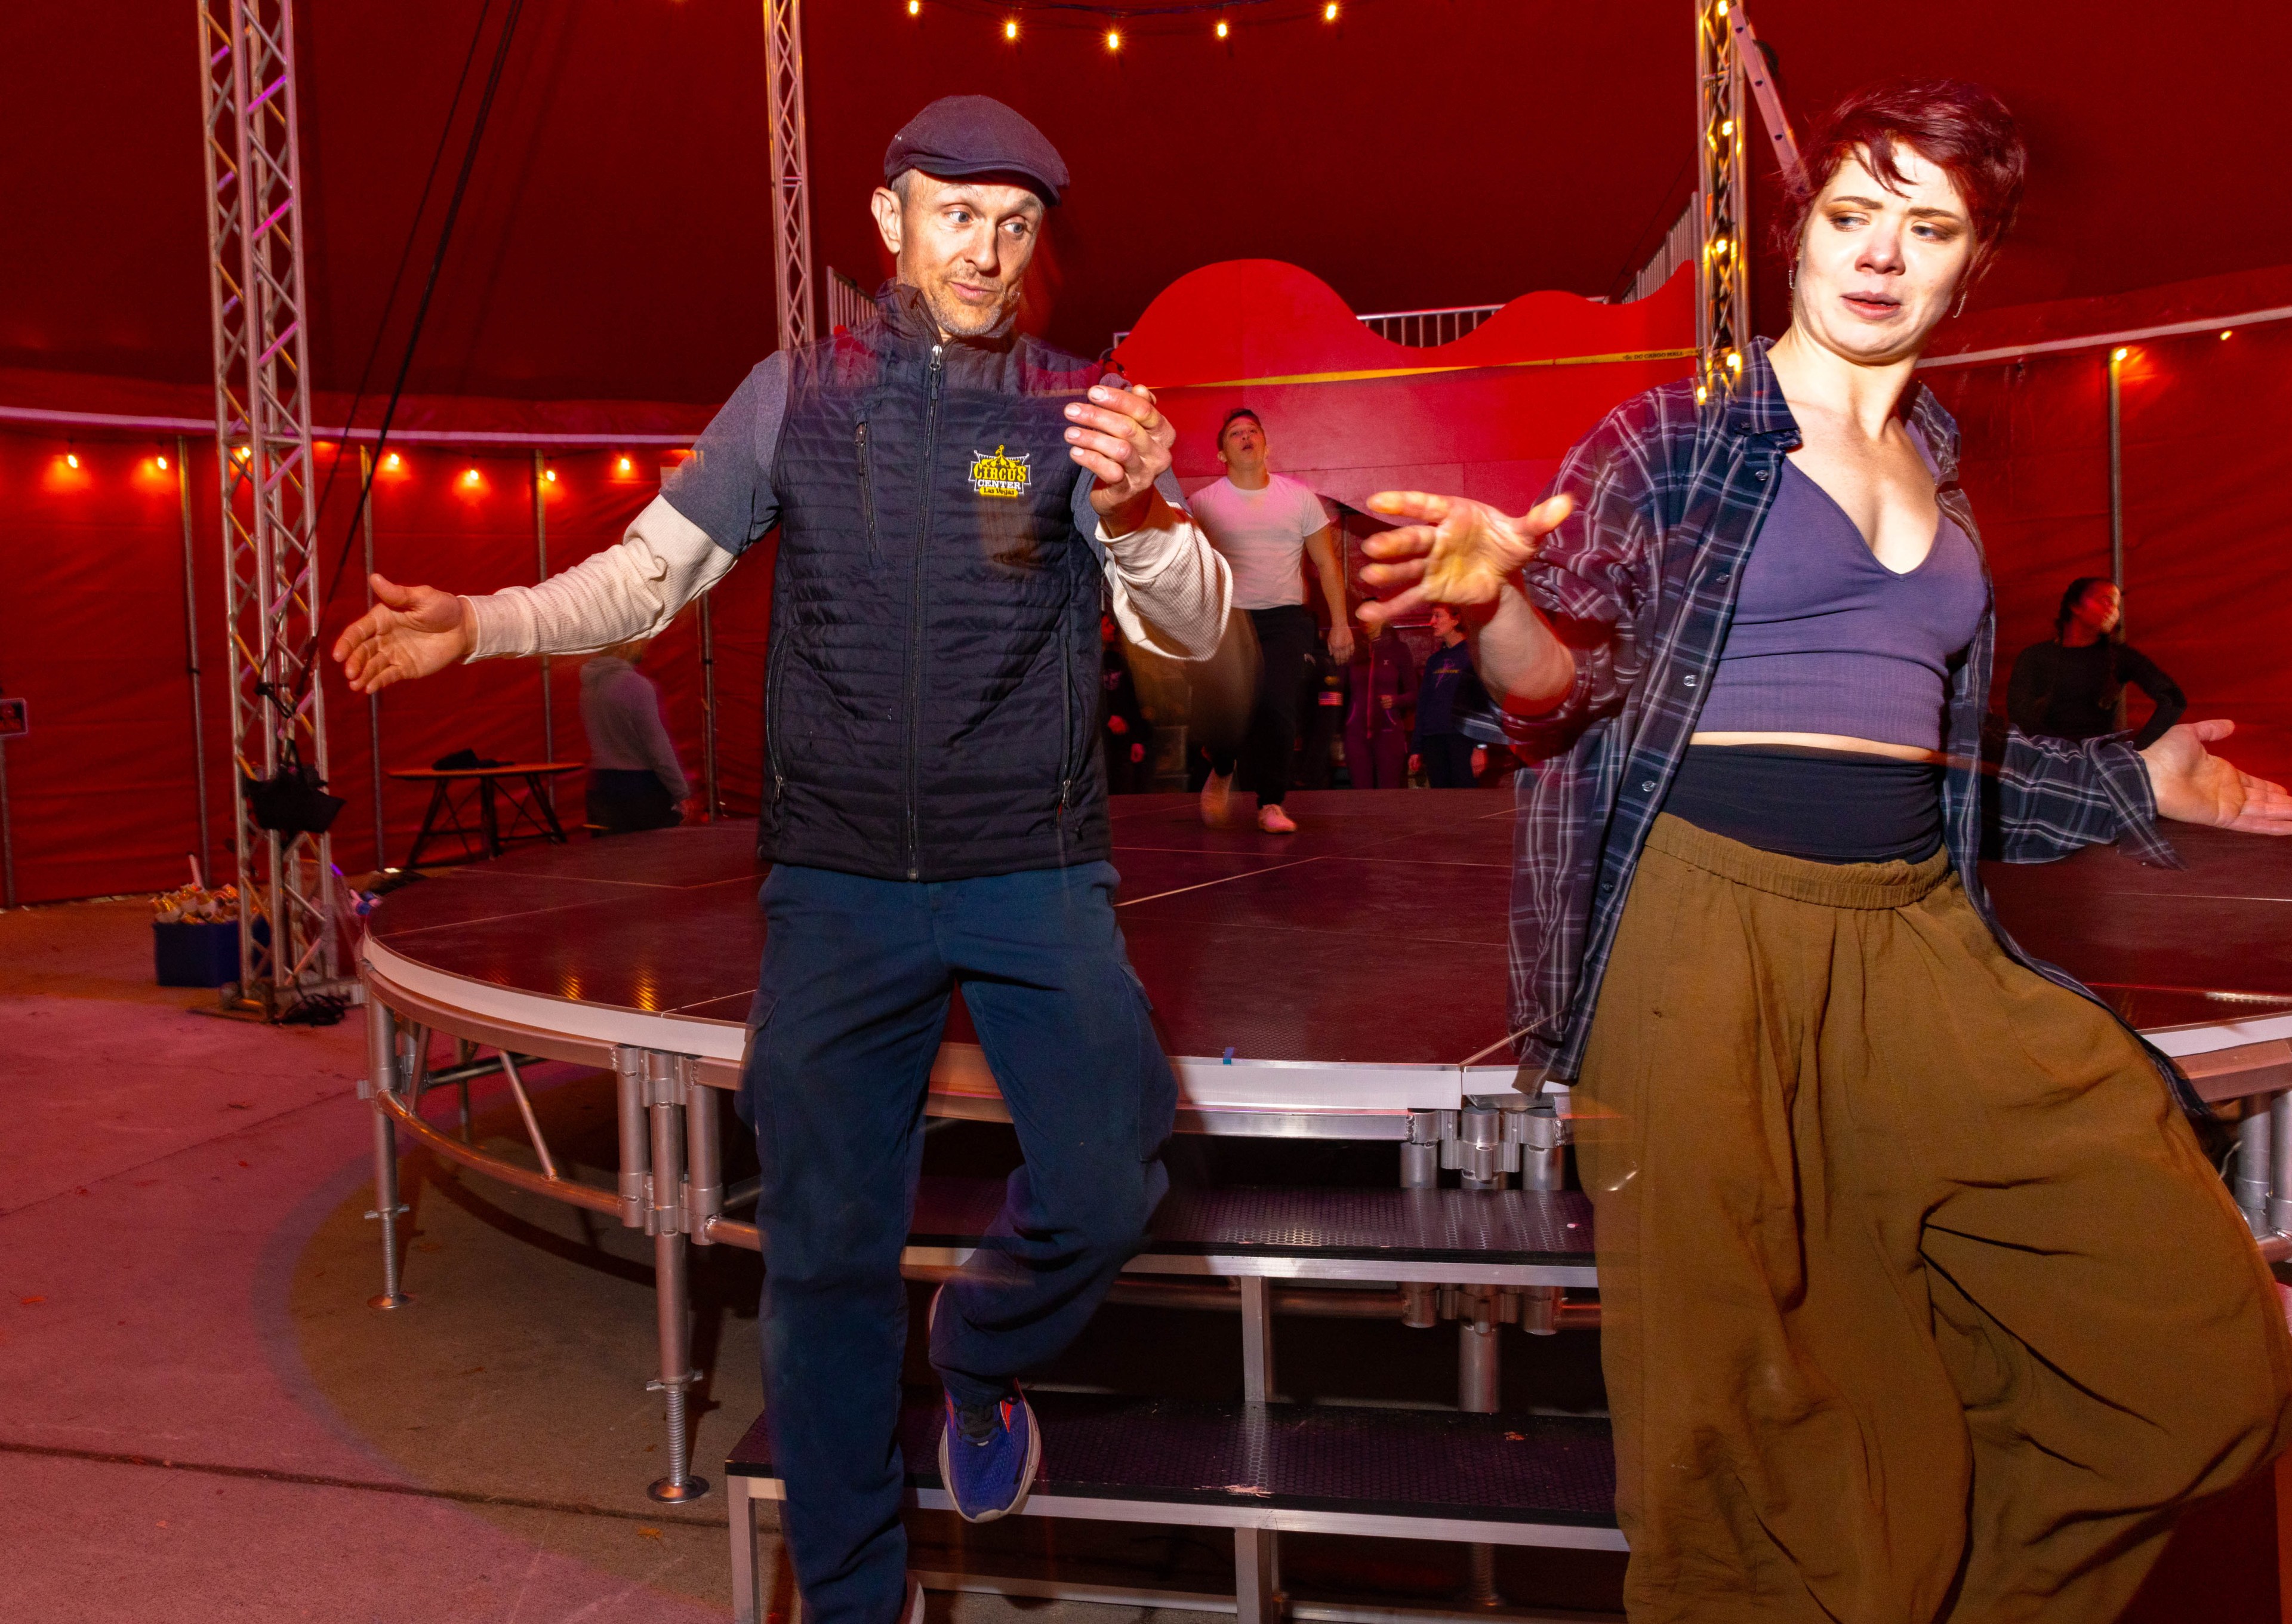 Two people practice inside inside a red circus tent.